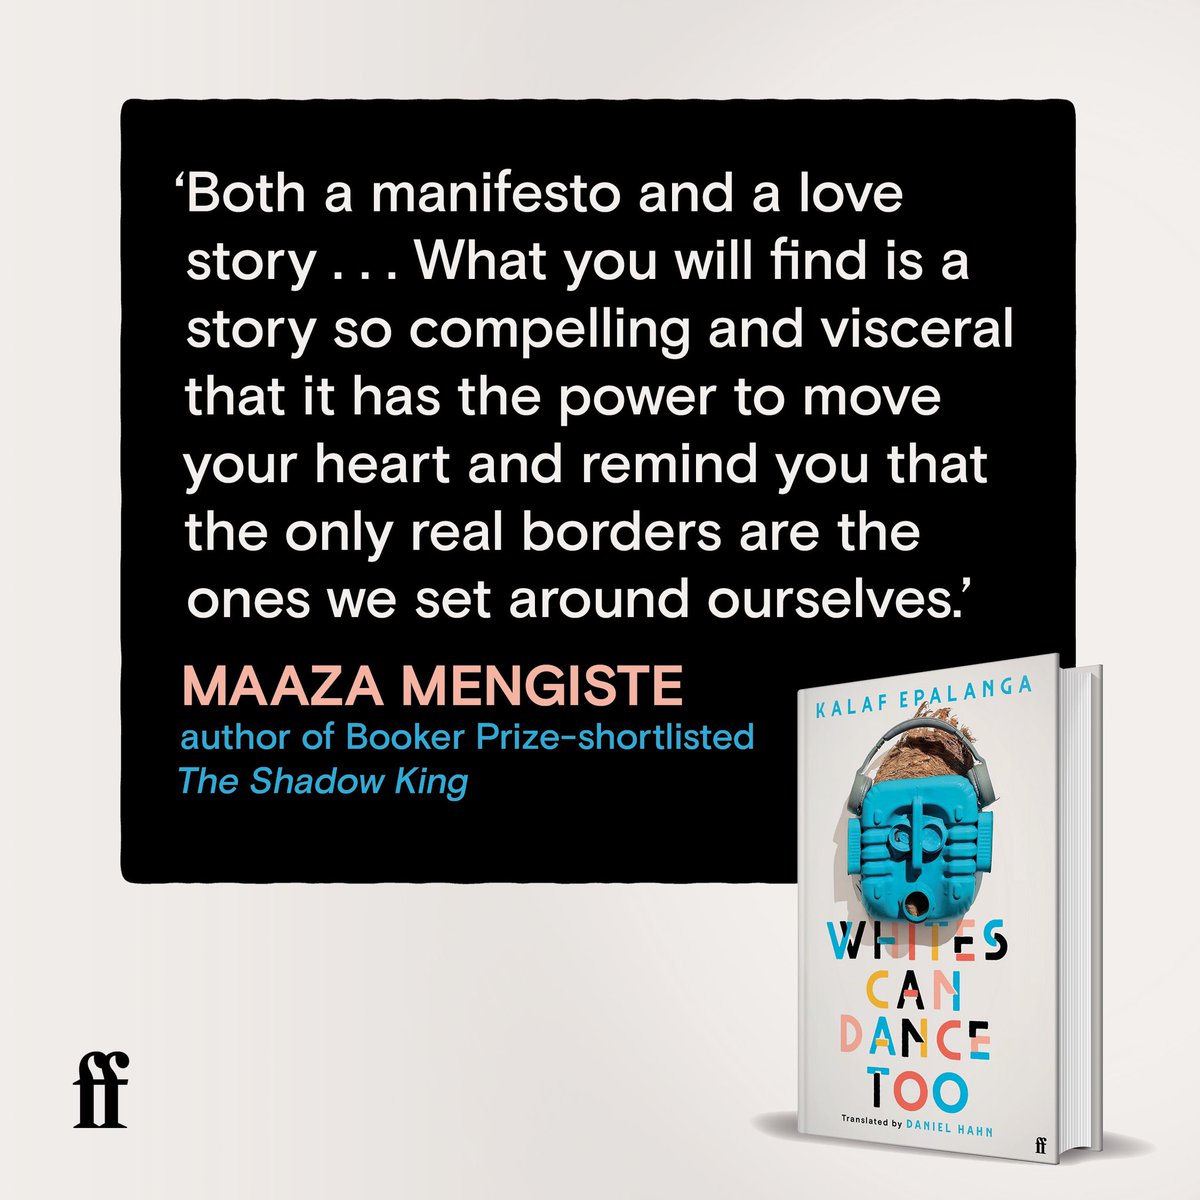 Grateful for everyone who's picked up a copy of #whitescandancetoo 📚 Enjoyed it? Your reviews and shares help it reach to more people. I truly appreciate your support! Thank you @MaazaMengiste #Africanliterature #BookReview #ShareTheLove